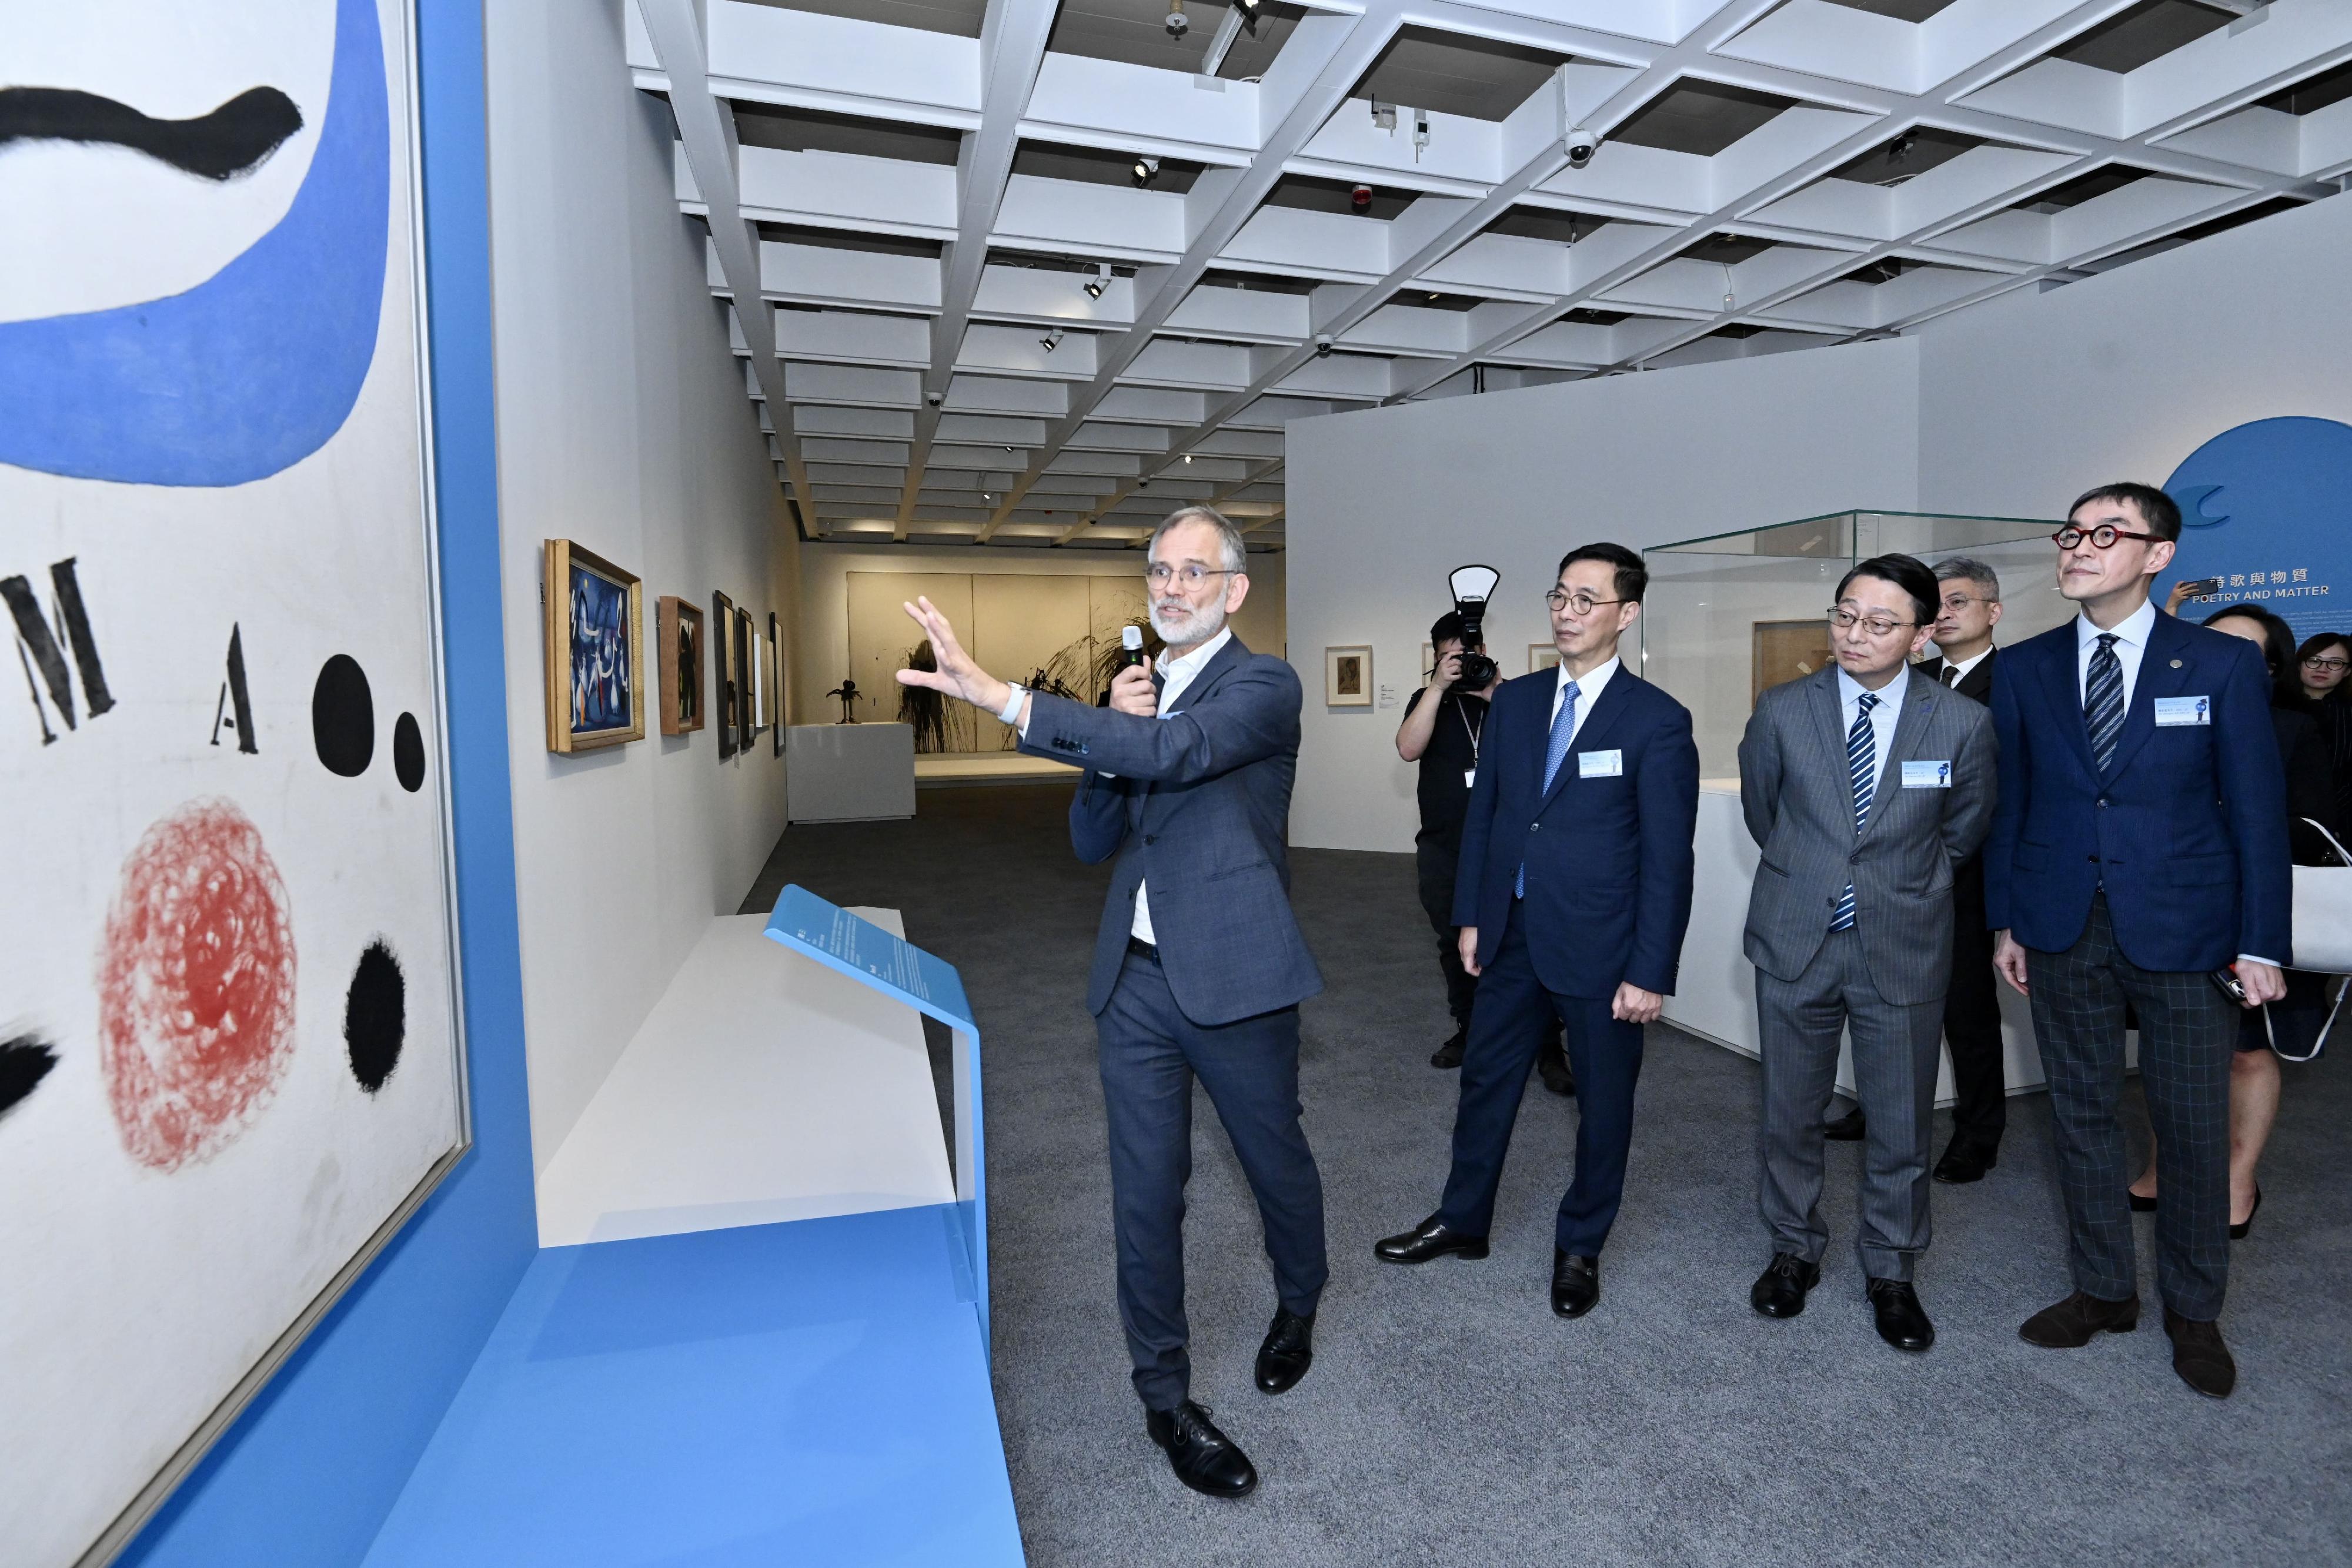 "The Hong Kong Jockey Club Series: Joan Miró — The Poetry of Everyday Life" exhibition will be held at the Hong Kong Museum of Art (HKMoA) starting from tomorrow (March 3). Picture shows officiating guests (from left) the Director of the Fundació Joan Miró, Dr Marko Daniel; the Secretary for Culture, Sports and Tourism, Mr Kevin Yeung; the Director of Leisure and Cultural Services, Mr Vincent Liu; and the Chairman of the Museum Advisory Committee, Mr Douglas So, during a tour of the exhibition today (March 2).